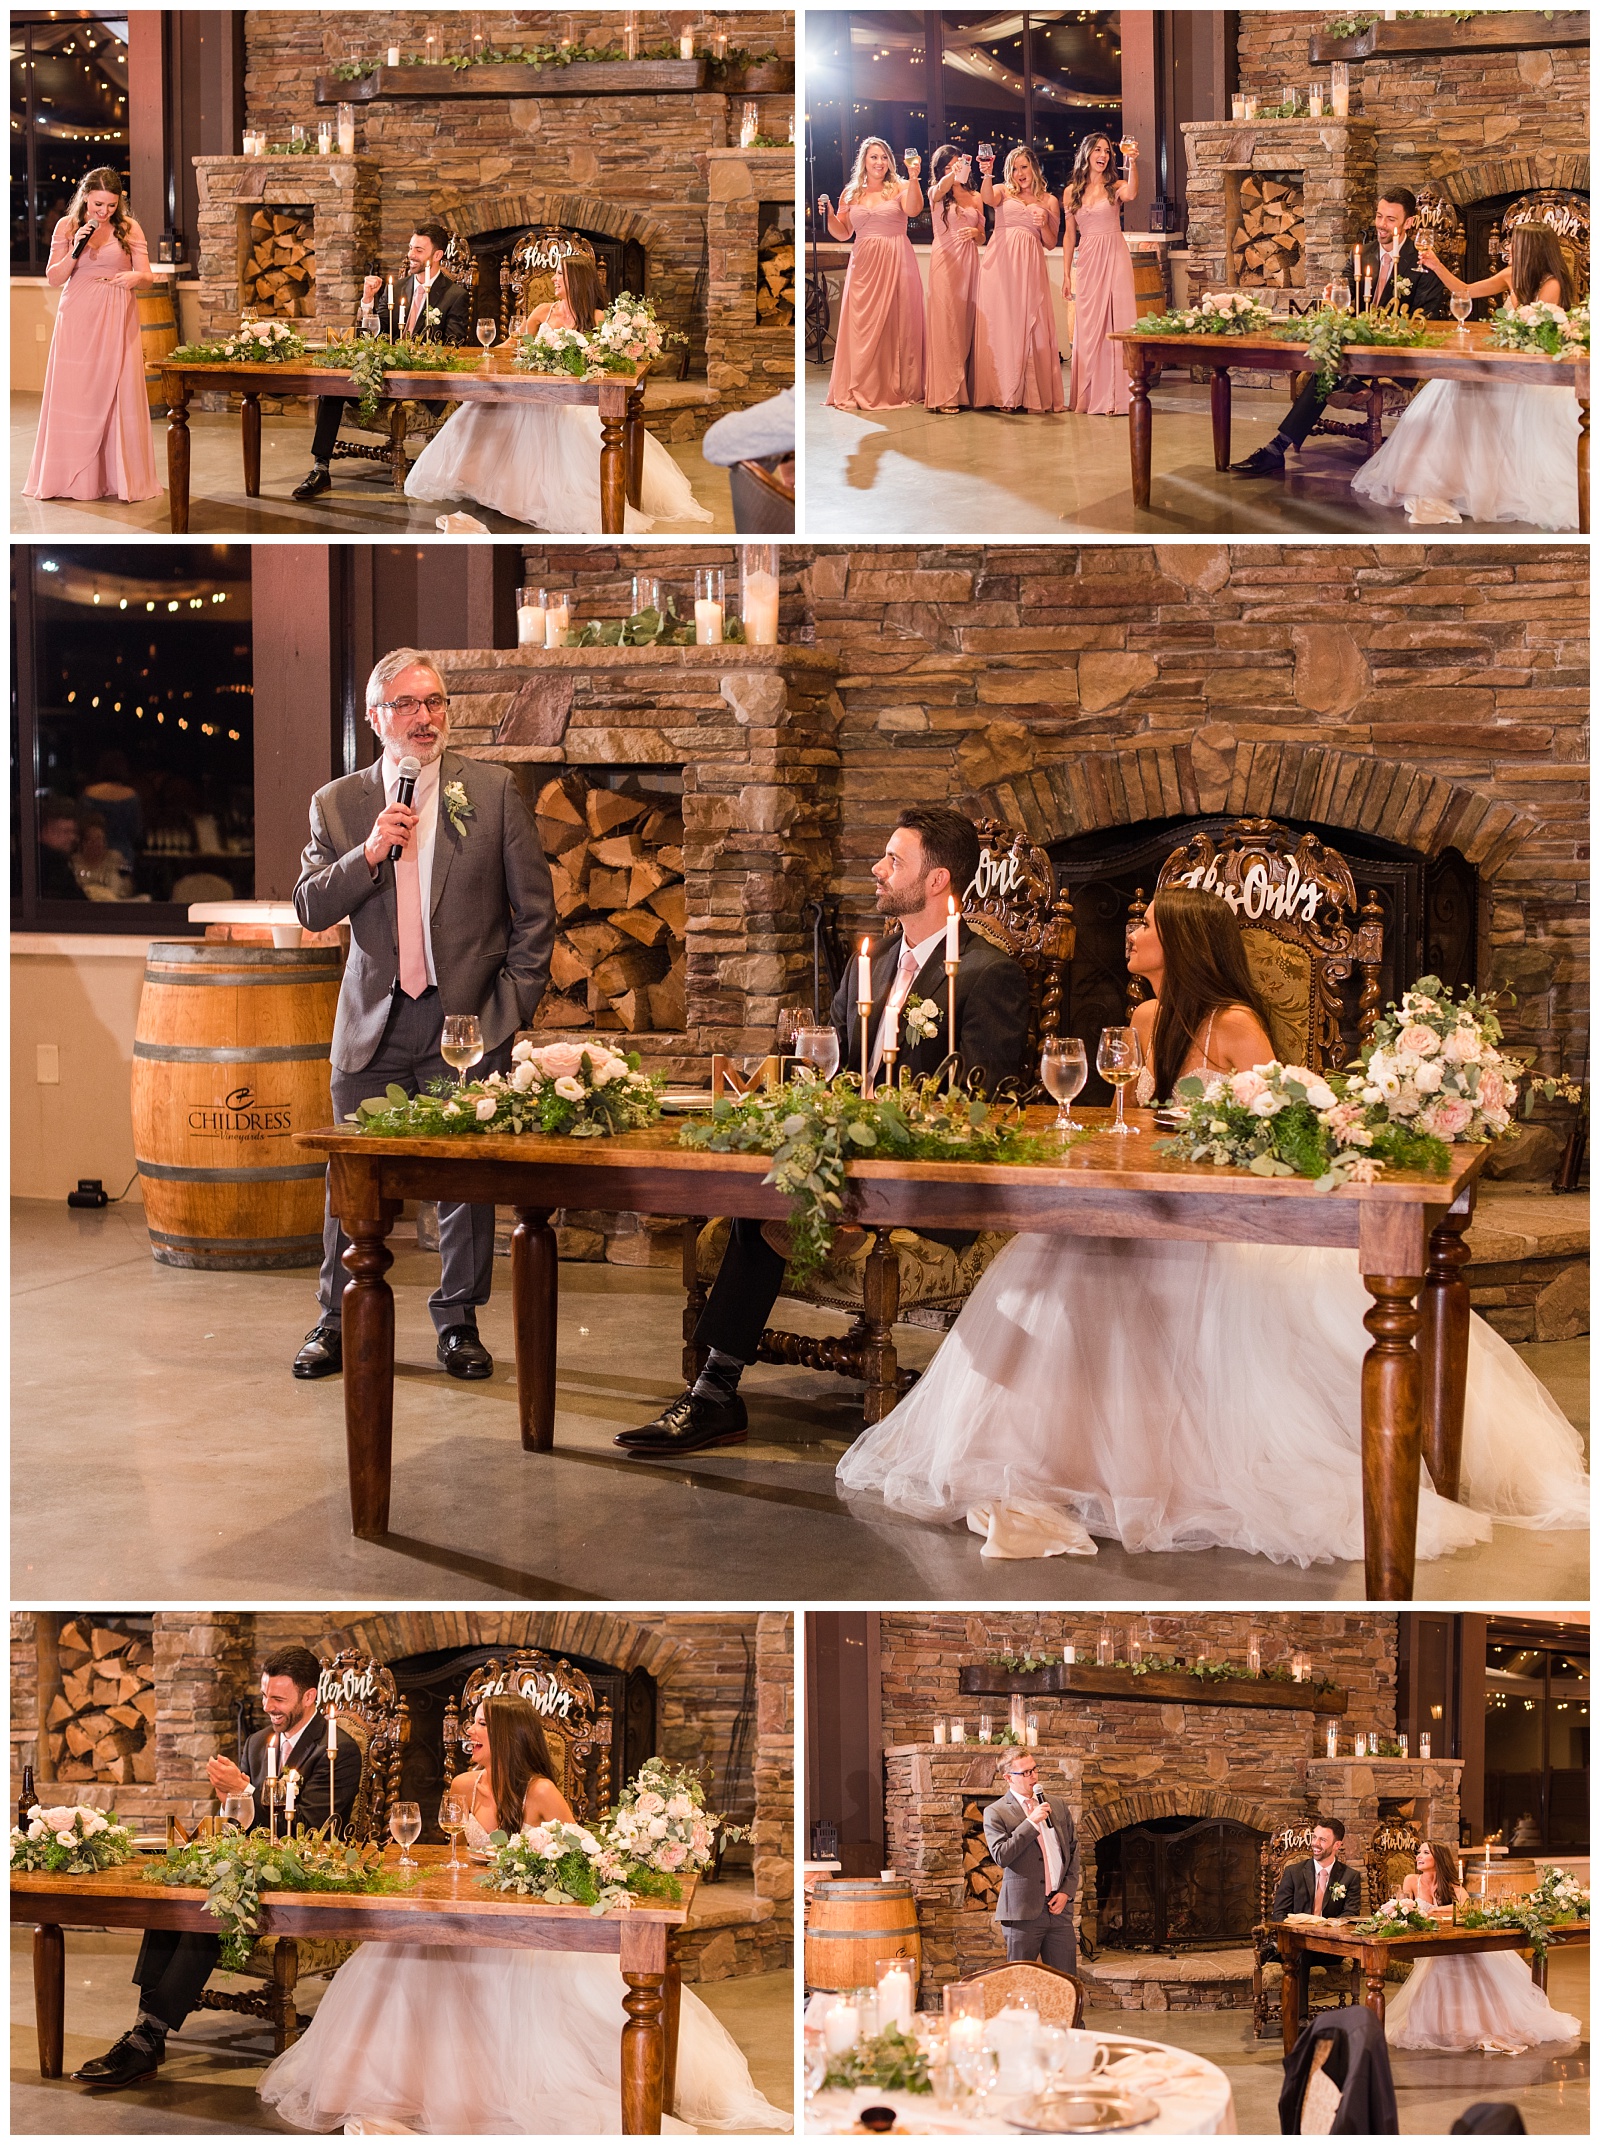 Where to stand for your wedding toasts to create great images.